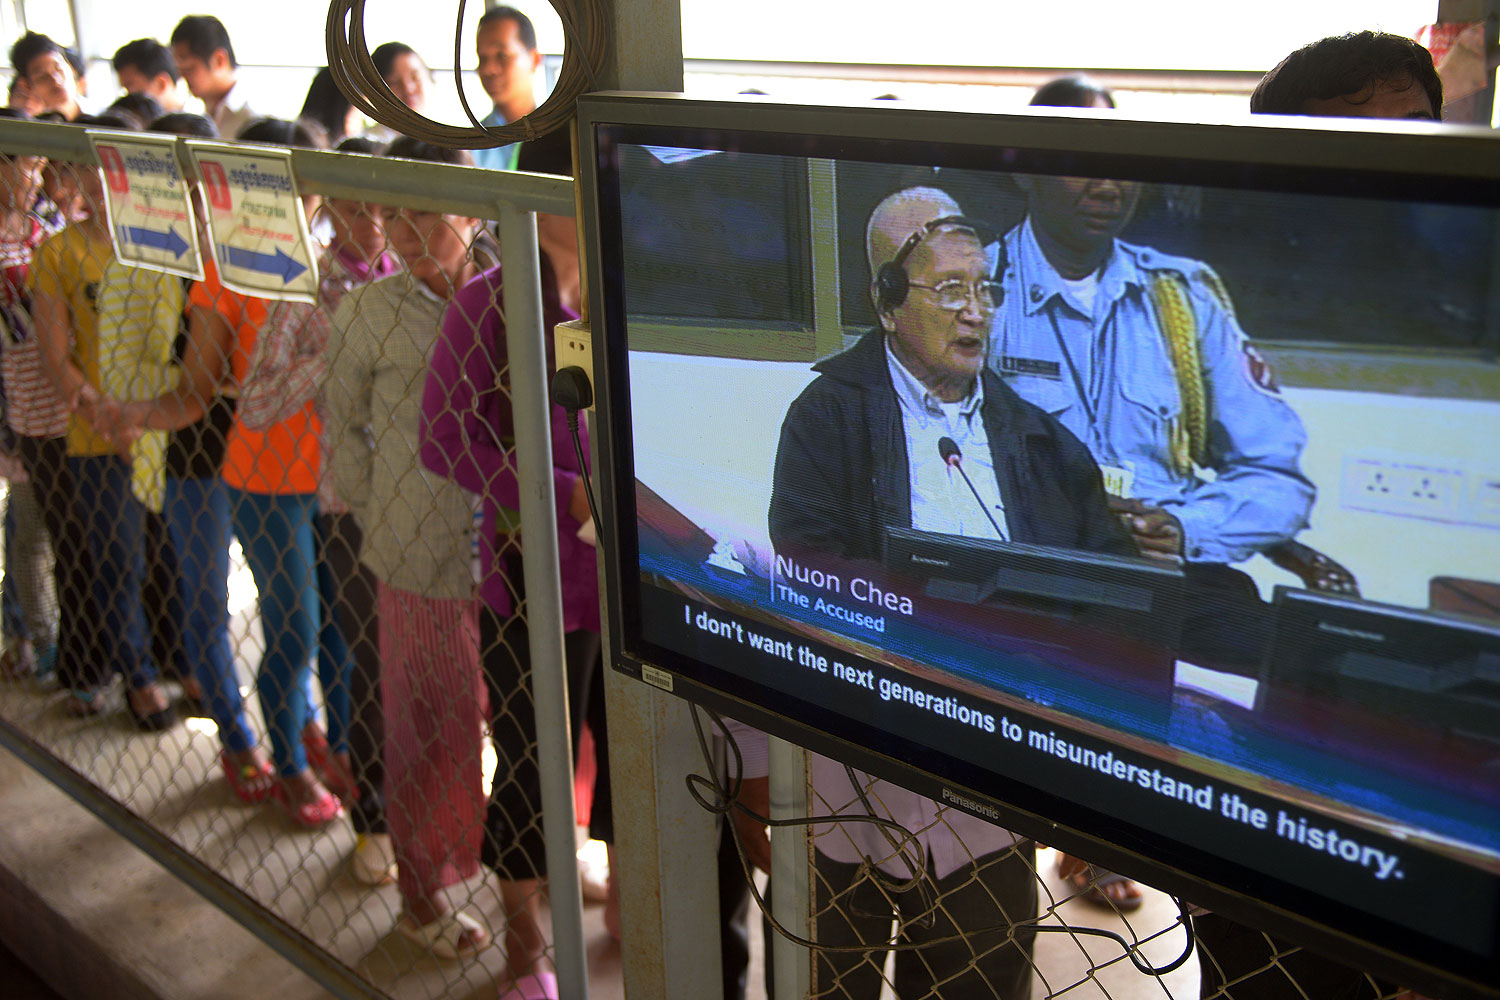 Former Cambodian Khmer Rouge leader "Brother Number Two" Nuon Chea is seen on a television screen (R) as people (L) line up to attend the trial of former Khmer Rouge leaders at the Extraordinary Chamber in the Courts of Cambodia (ECCC) in Phnom Penh in Oct. 2013 (Tang Chhin Sothy—AFP/Getty Images)